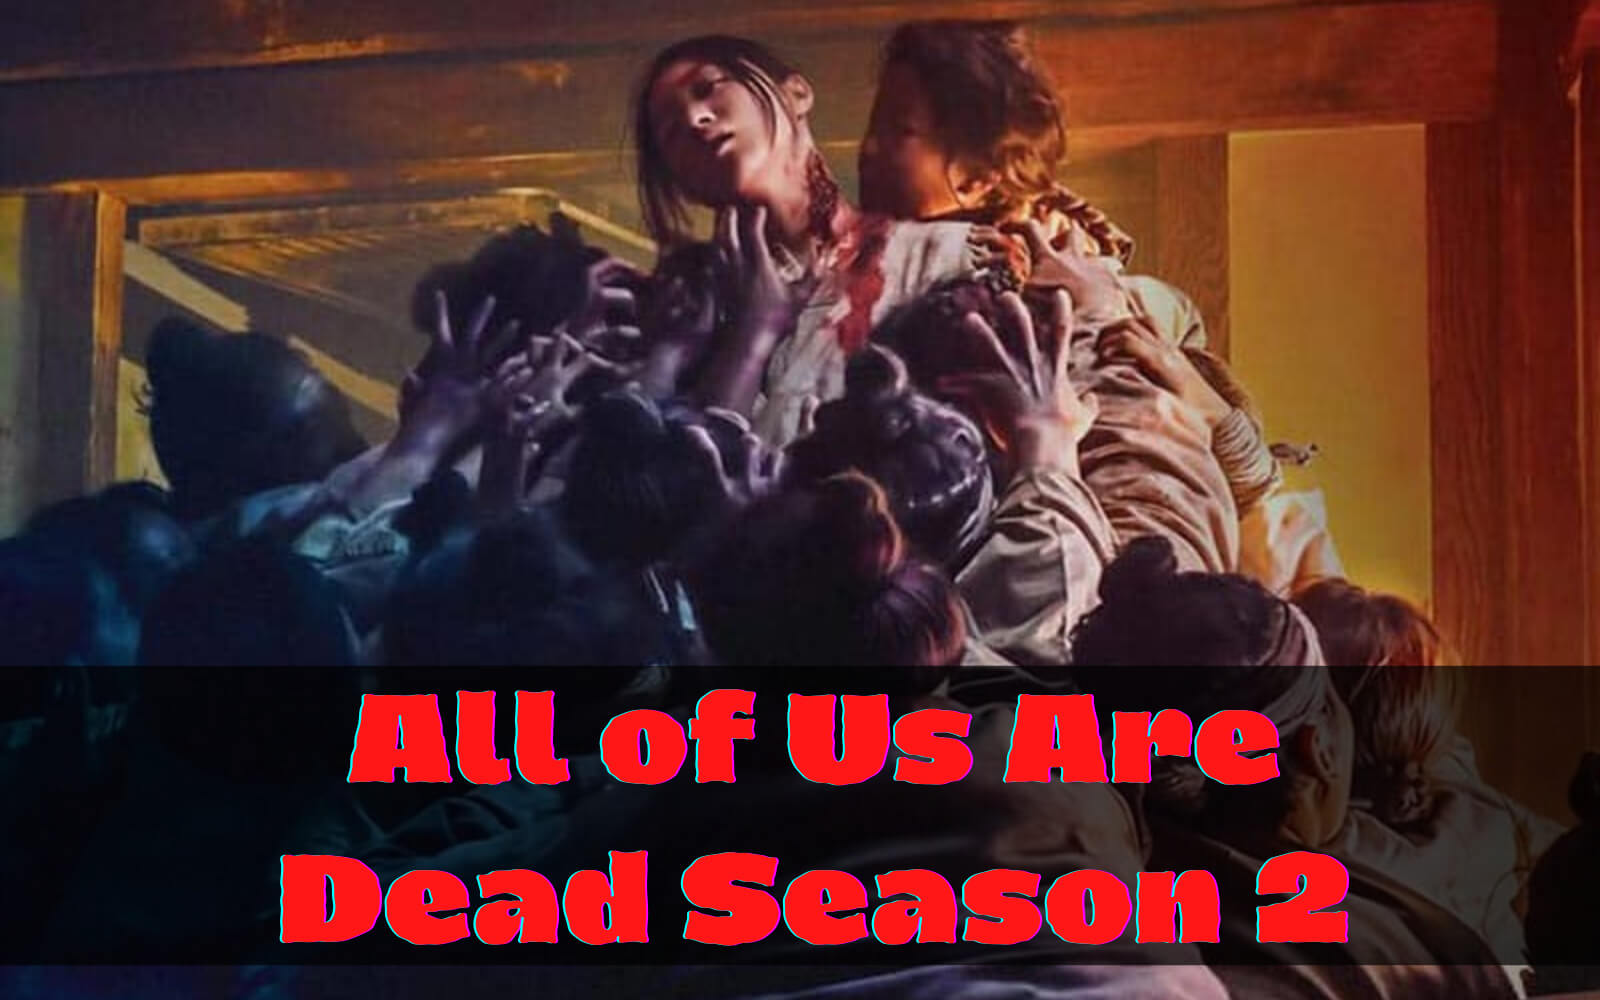 All Of Us Are Dead Season 2 Trailer Evolution comes with a price